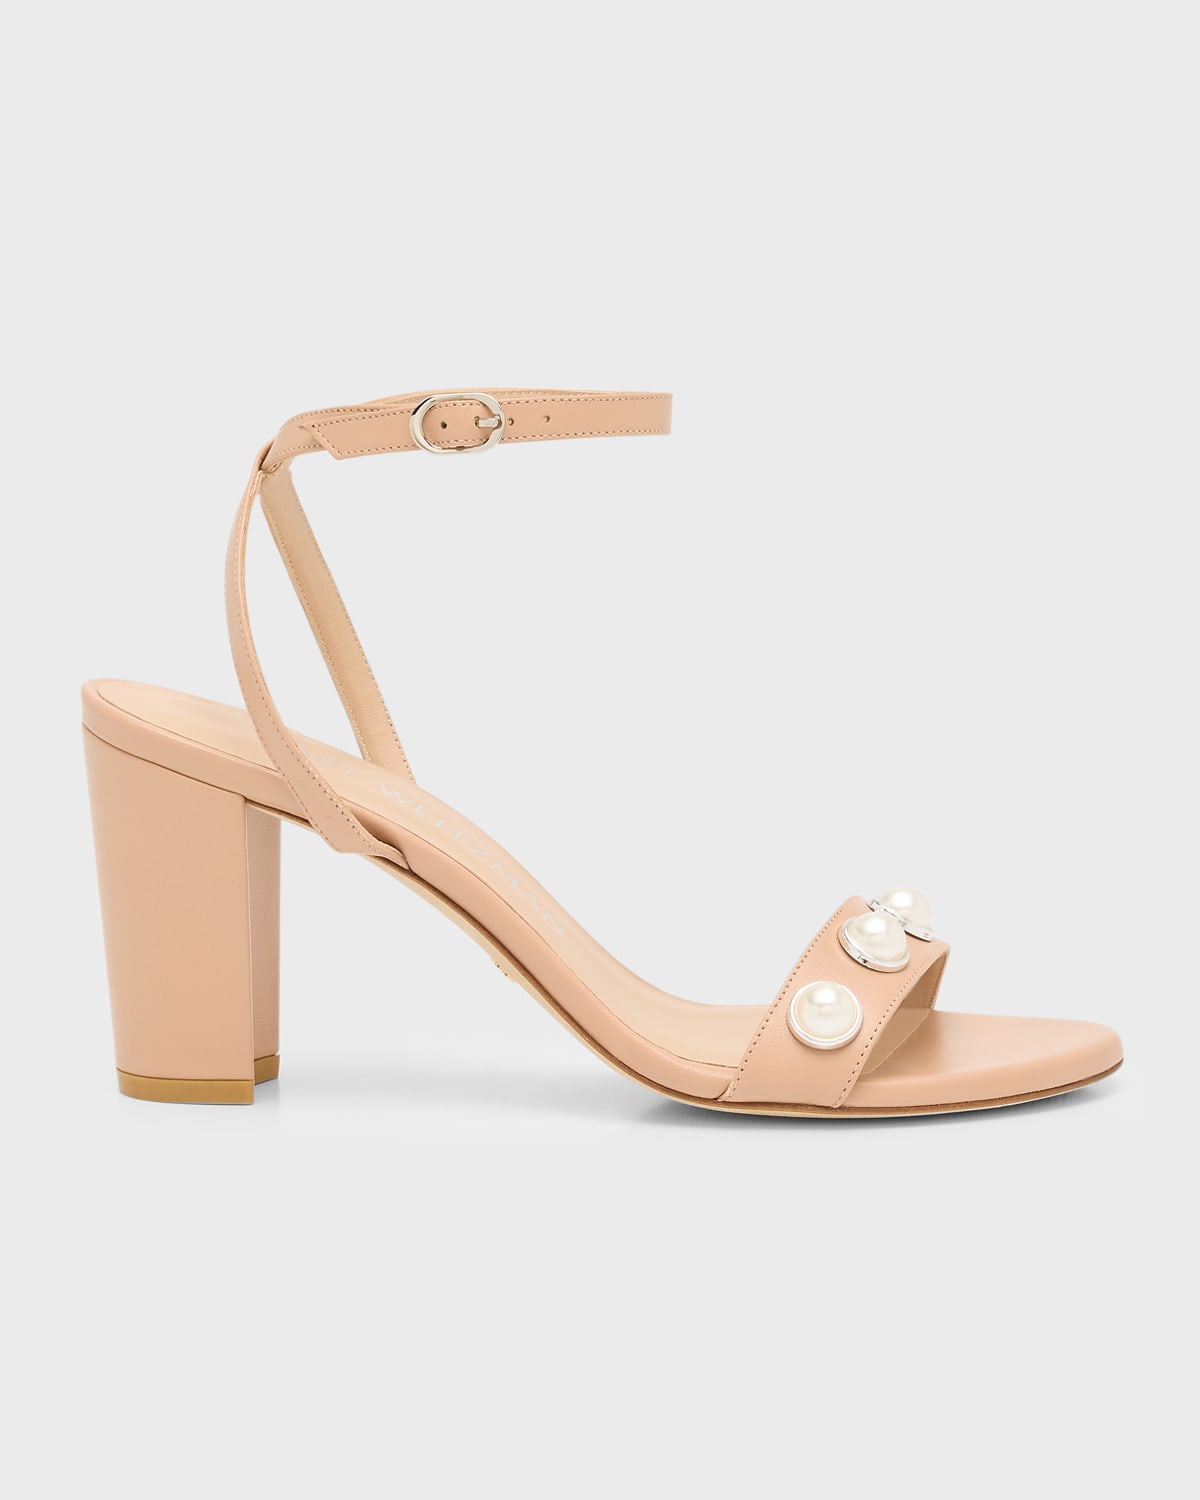 STUART WEITZMAN NEARLYBARE LEATHER PEARLY ANKLE-STRAP SANDALS